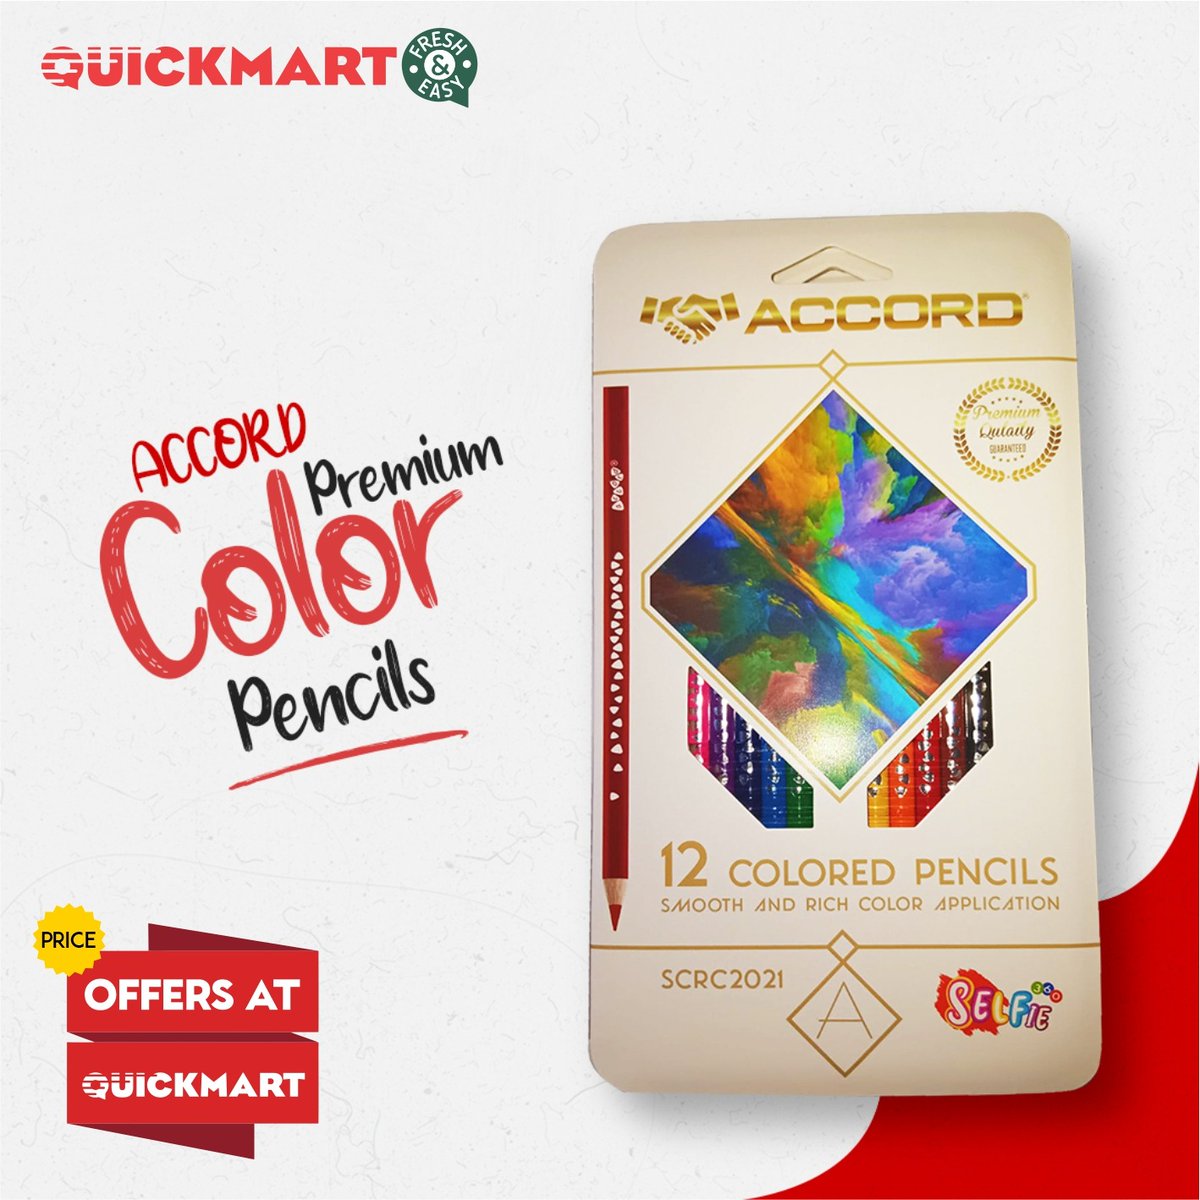 Buy the #AccordPremiumColourPencil for vibrant artwork! Find them on offers at @QuickmartKenya. These high-quality colour pencils are perfect for drawing needs, are reliable and durable. Suitable for use at home , school or the office. #Beinafuu #backtoschool @store_centropen